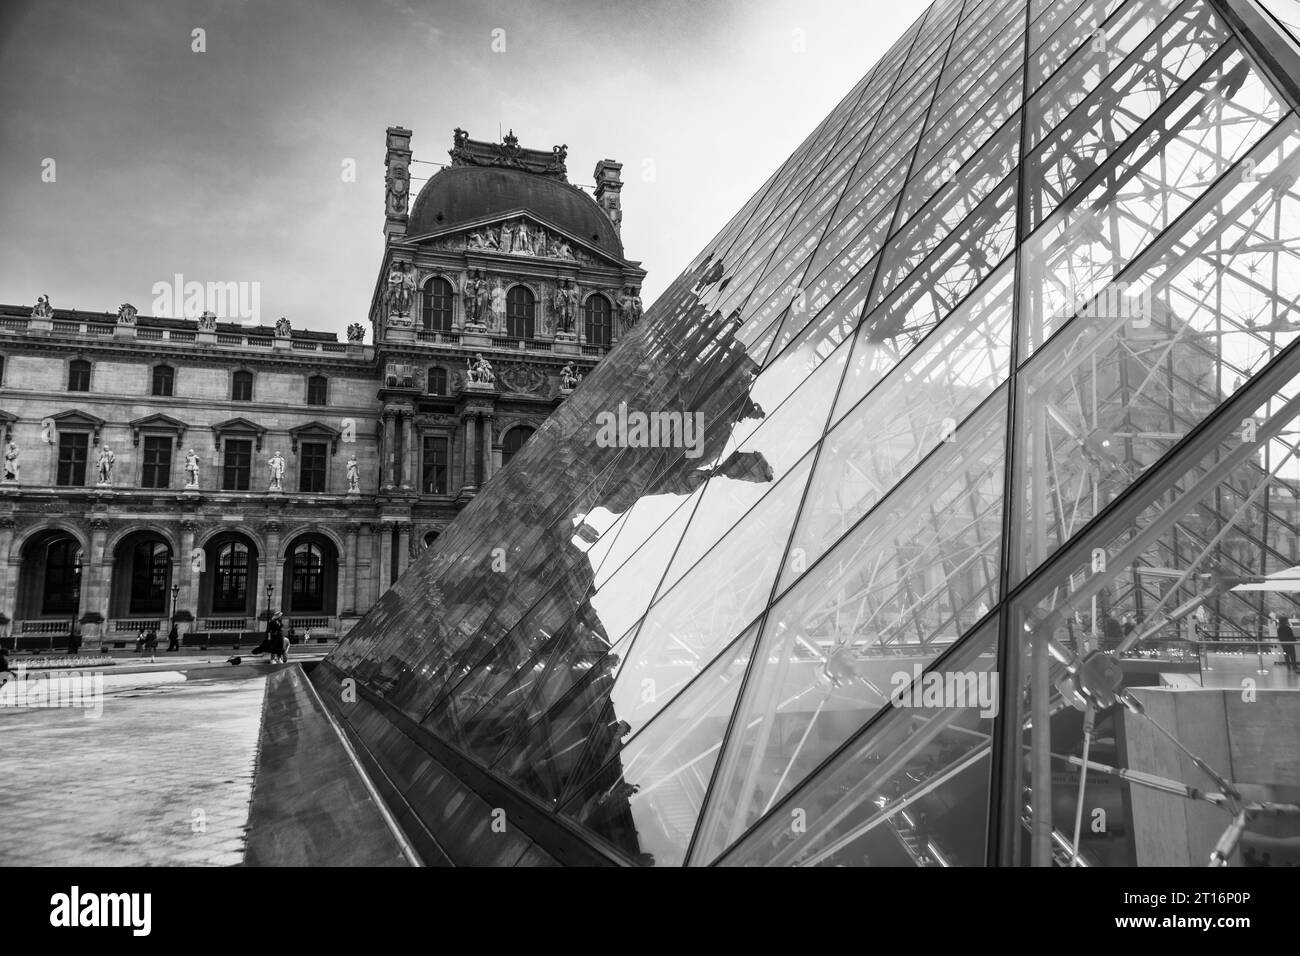 Courtyard and glass pyramid of the Louvre Museum at dusk, Paris, France Stock Photo